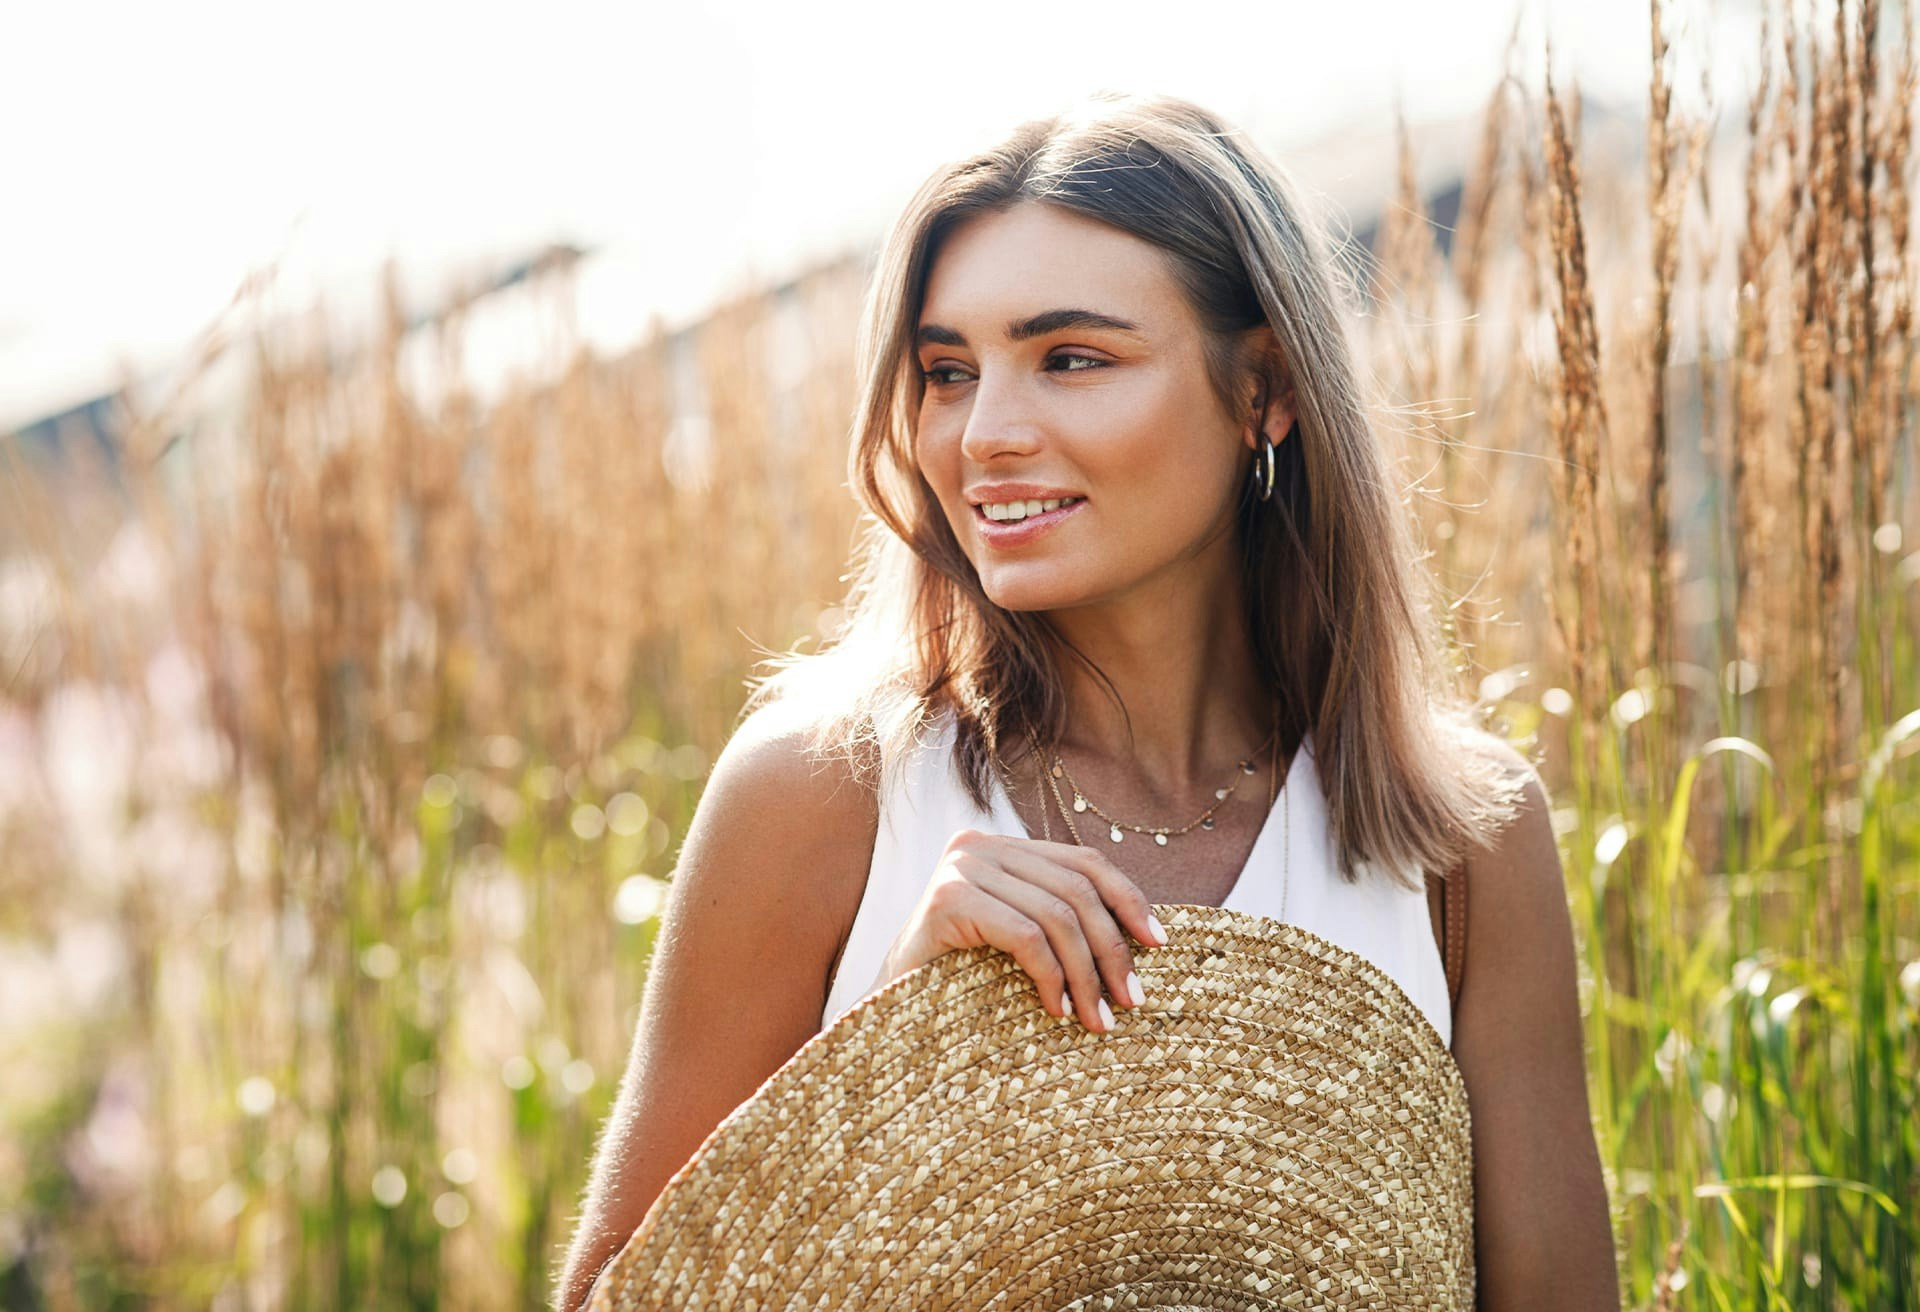 Smiling woman holding straw hat looking over right shoulder in front of wheat field.